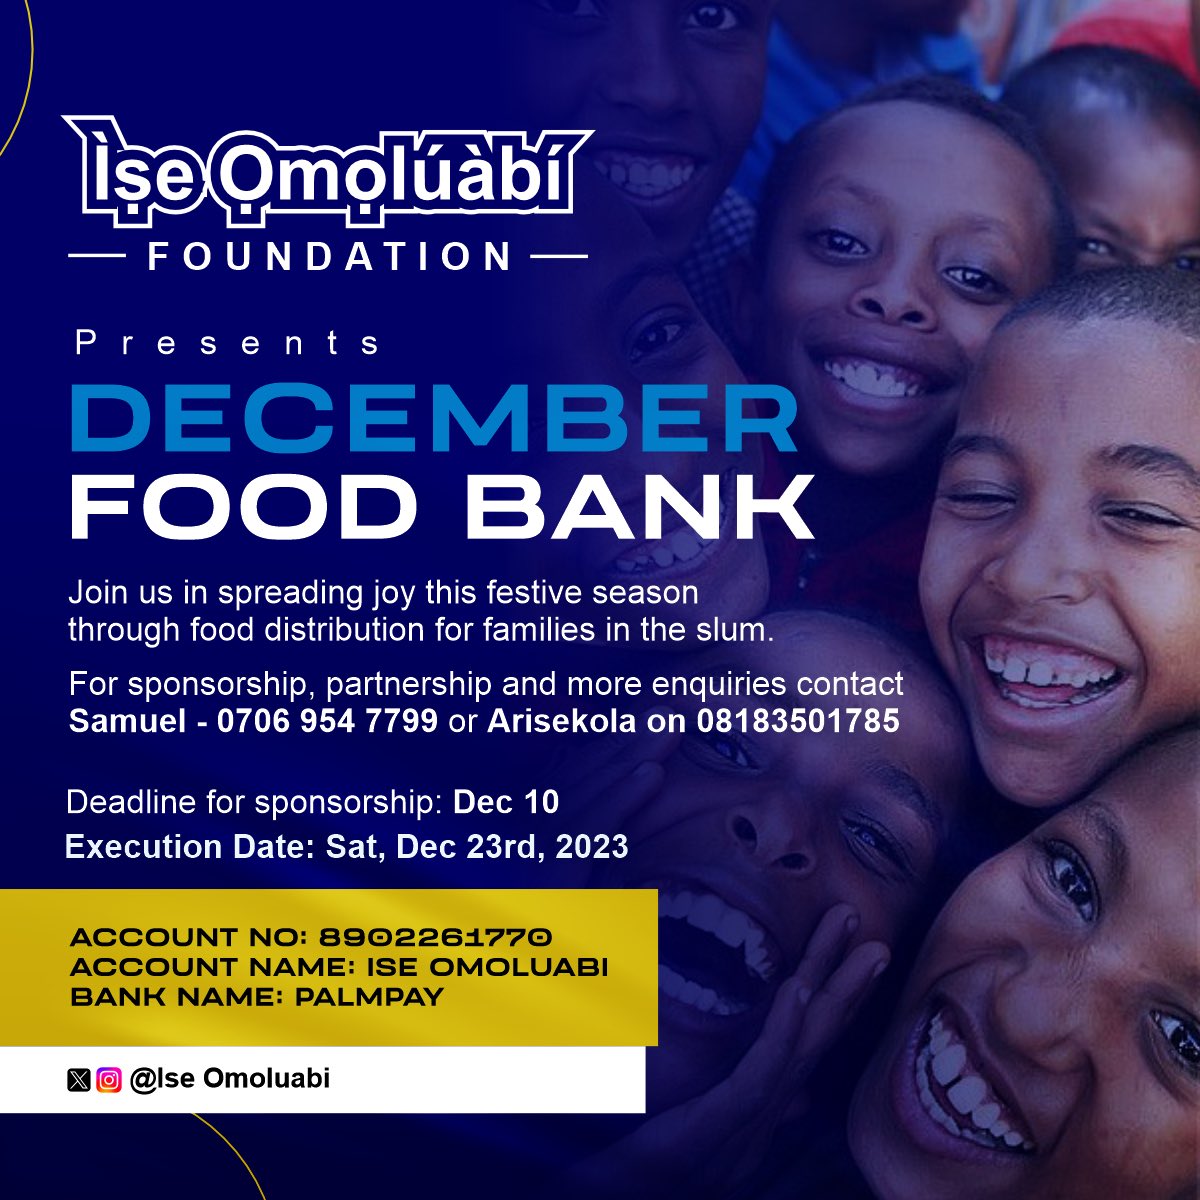 Support Ìse Omolúàbí Foundation in nourishing lives and extending the festive joy to the needy this December. Your donation goes a long way. Together, we can give the slum a memorable season!

#FeedingHope #SeasonOfSharing #IseOmoluabi